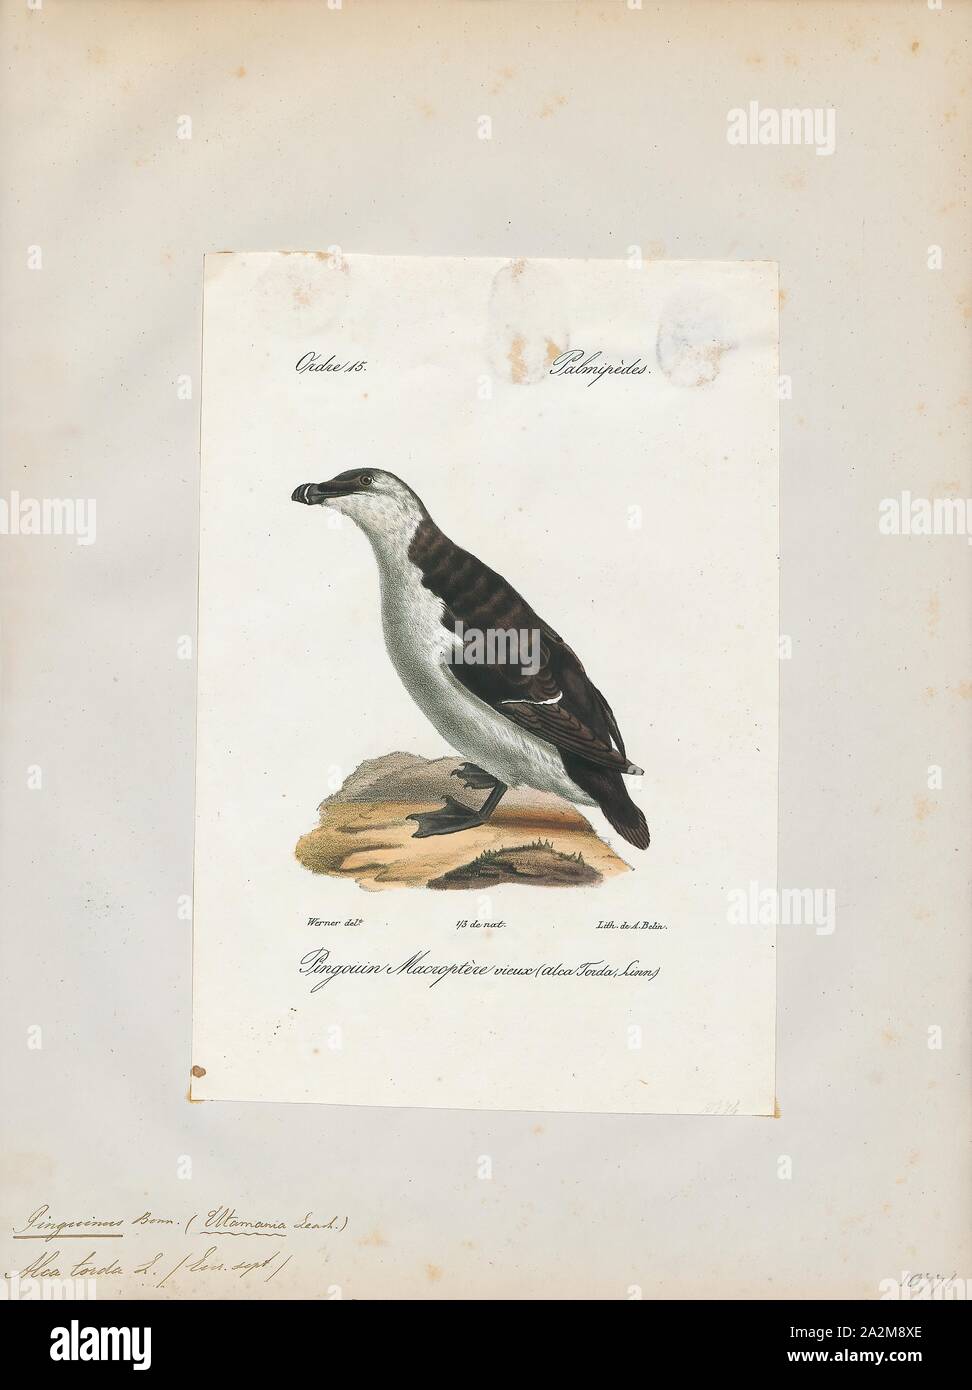 Chenalopex torda, Print, Great auk, The great auk (Pinguinus impennis) is an extinct species of flightless alcid that became extinct in the mid-19th century. It was the only modern species in the genus Pinguinus. It is not closely related to the birds now known as penguins, which were discovered later and so named by sailors because of their physical resemblance to the great auk., 1842-1848 Stock Photo